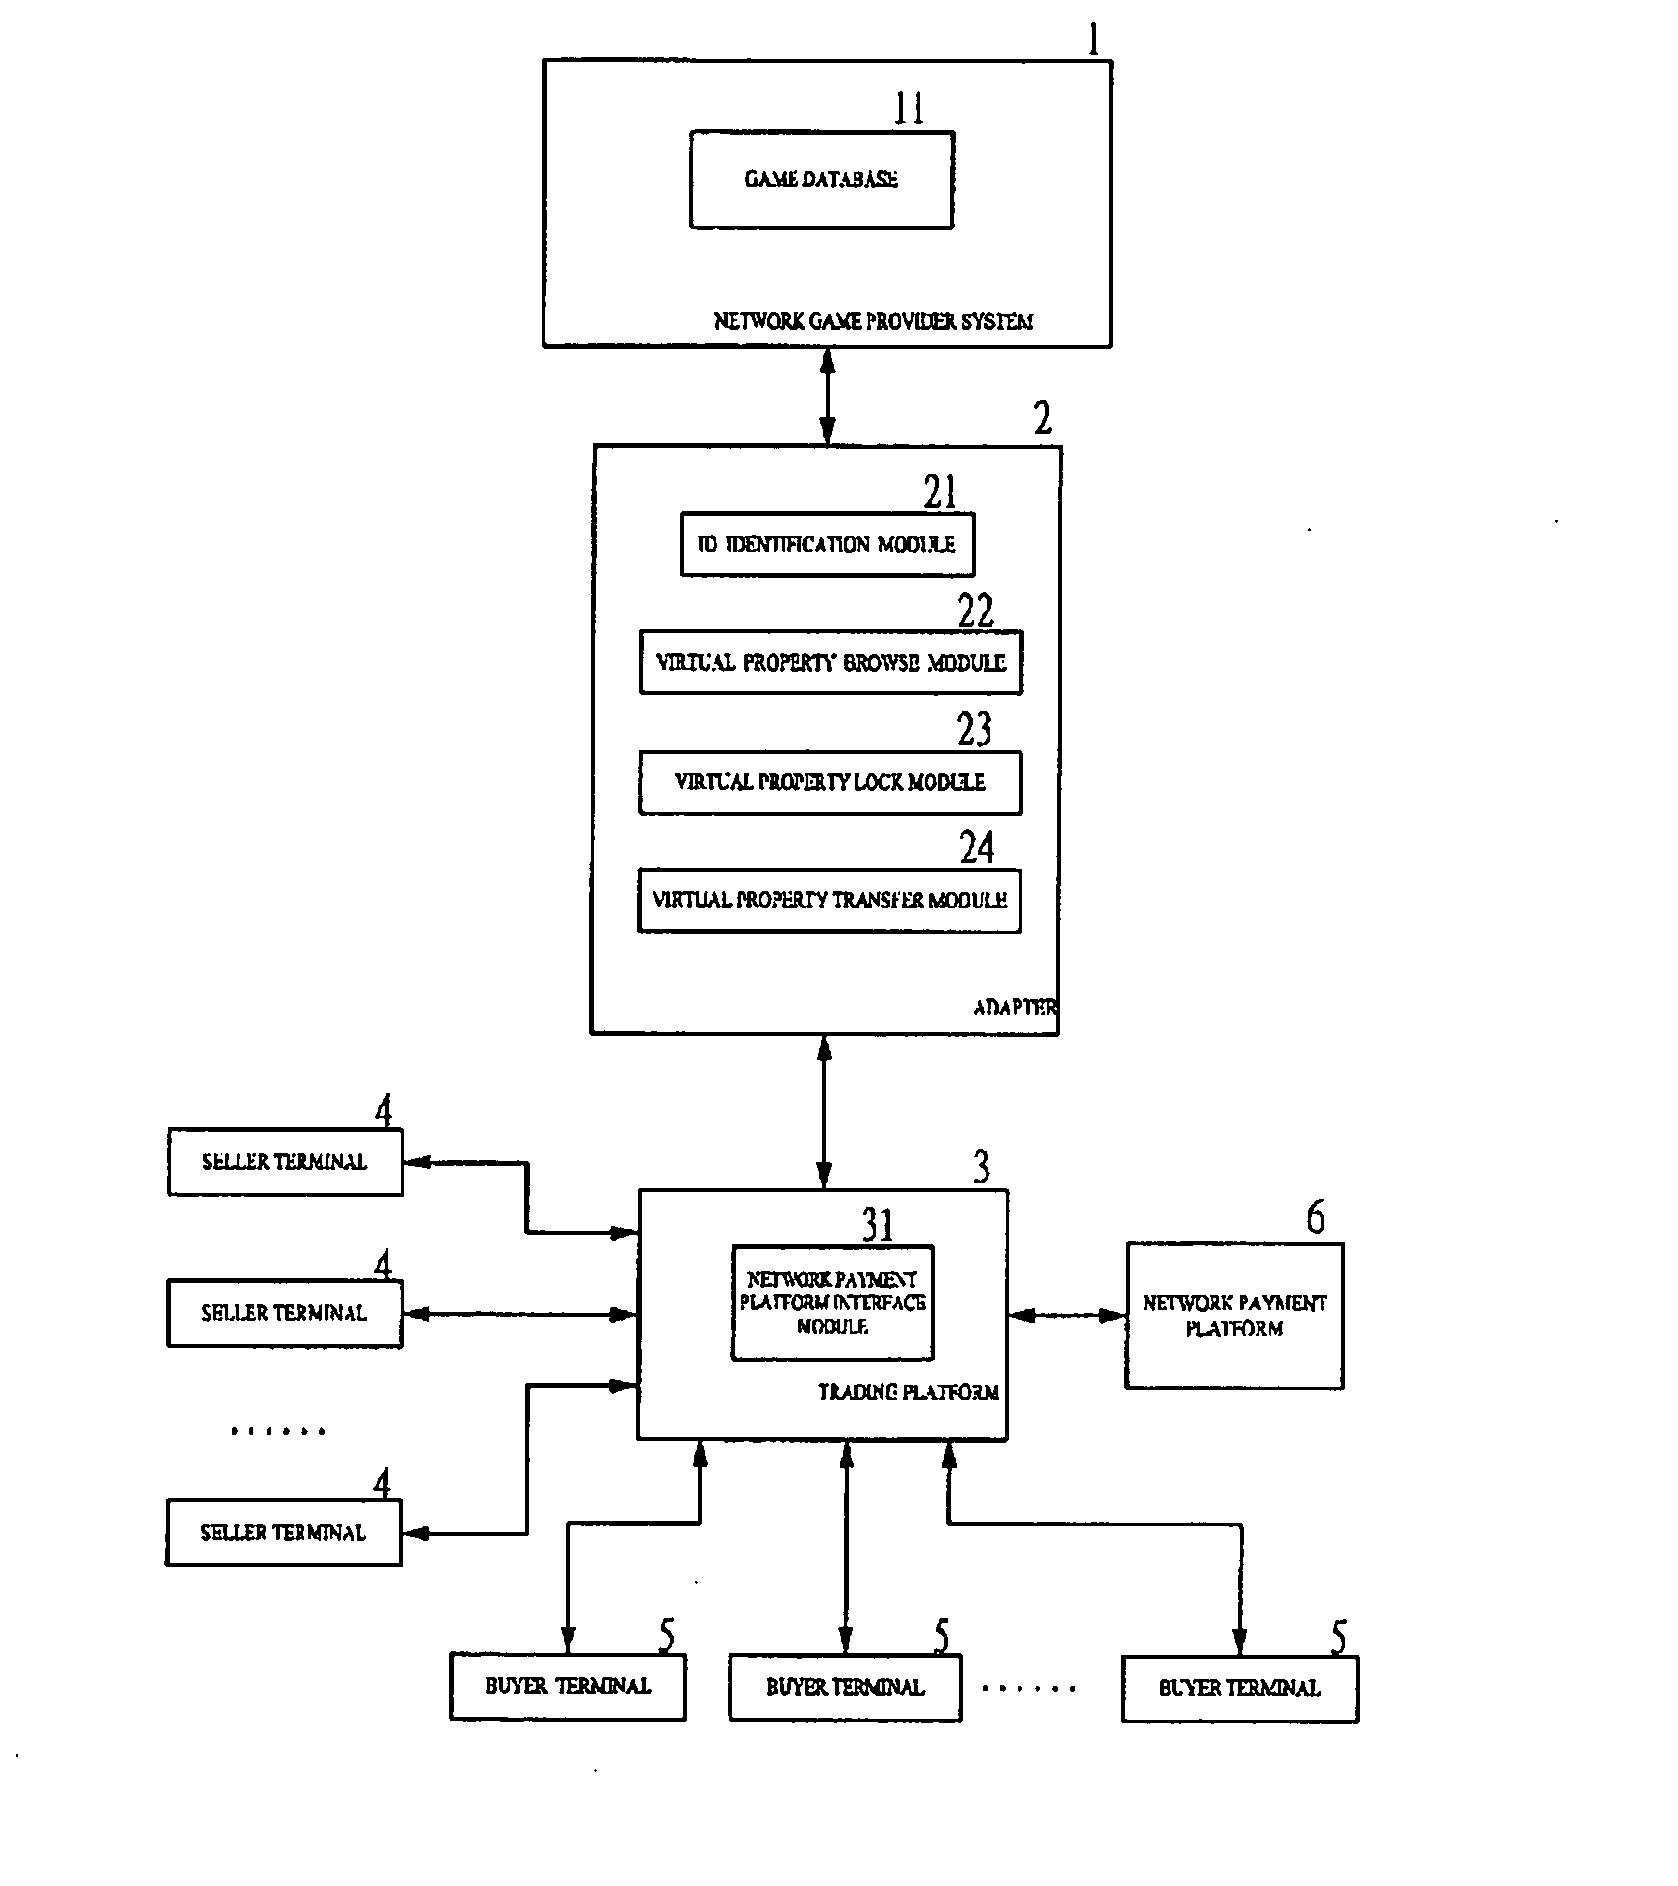 Method and system for online payment of the virtual property trading of the network game